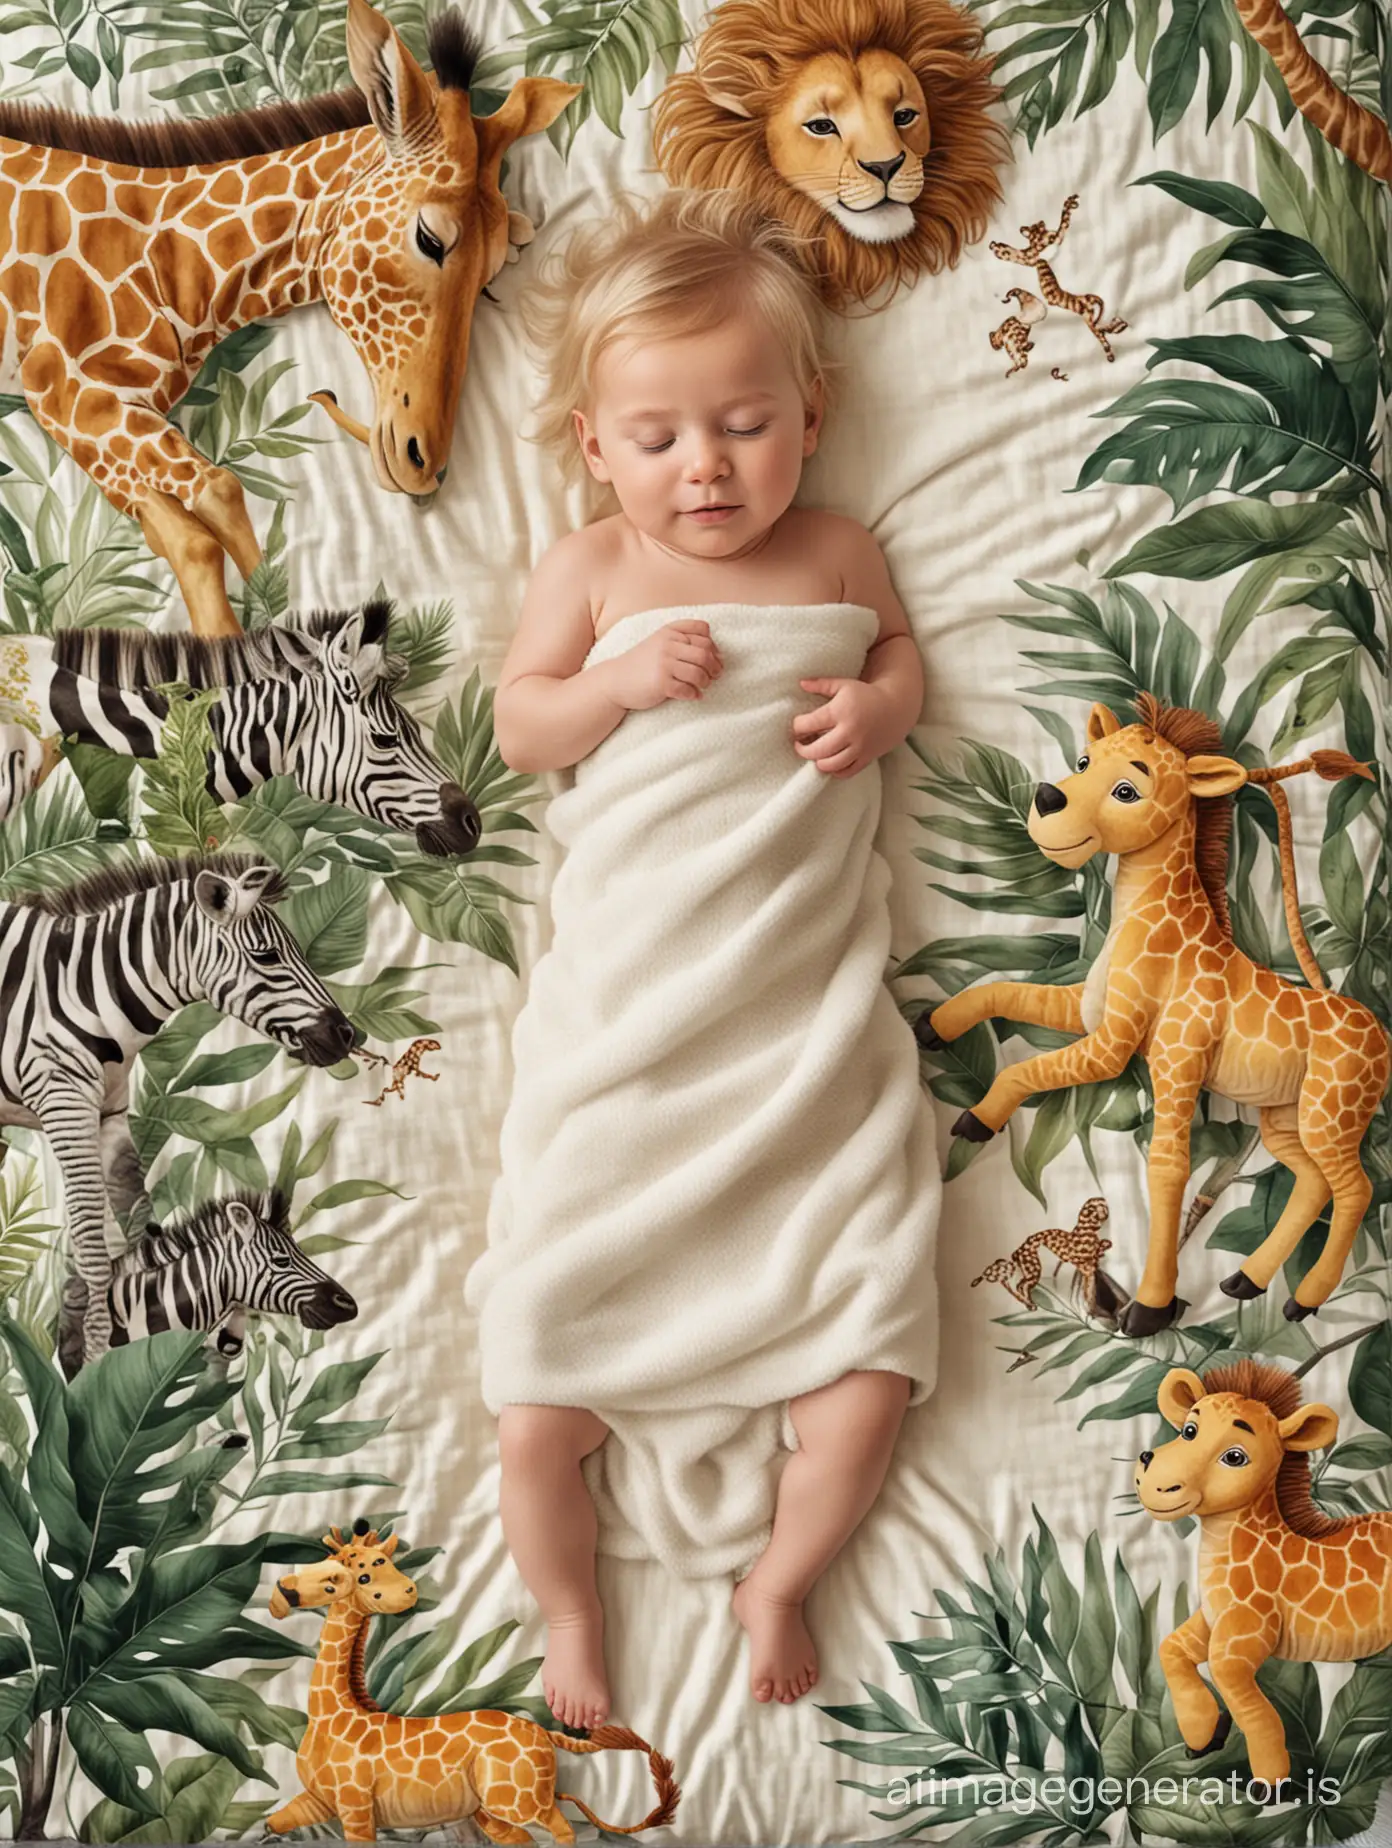 In a tropical forest, a blond baby sleeps on a mattress.
Around the mattress and looking at the child are a giraffe, a lion, a monkey, a zebra and a snake.
The animals look tender and caring for the child.